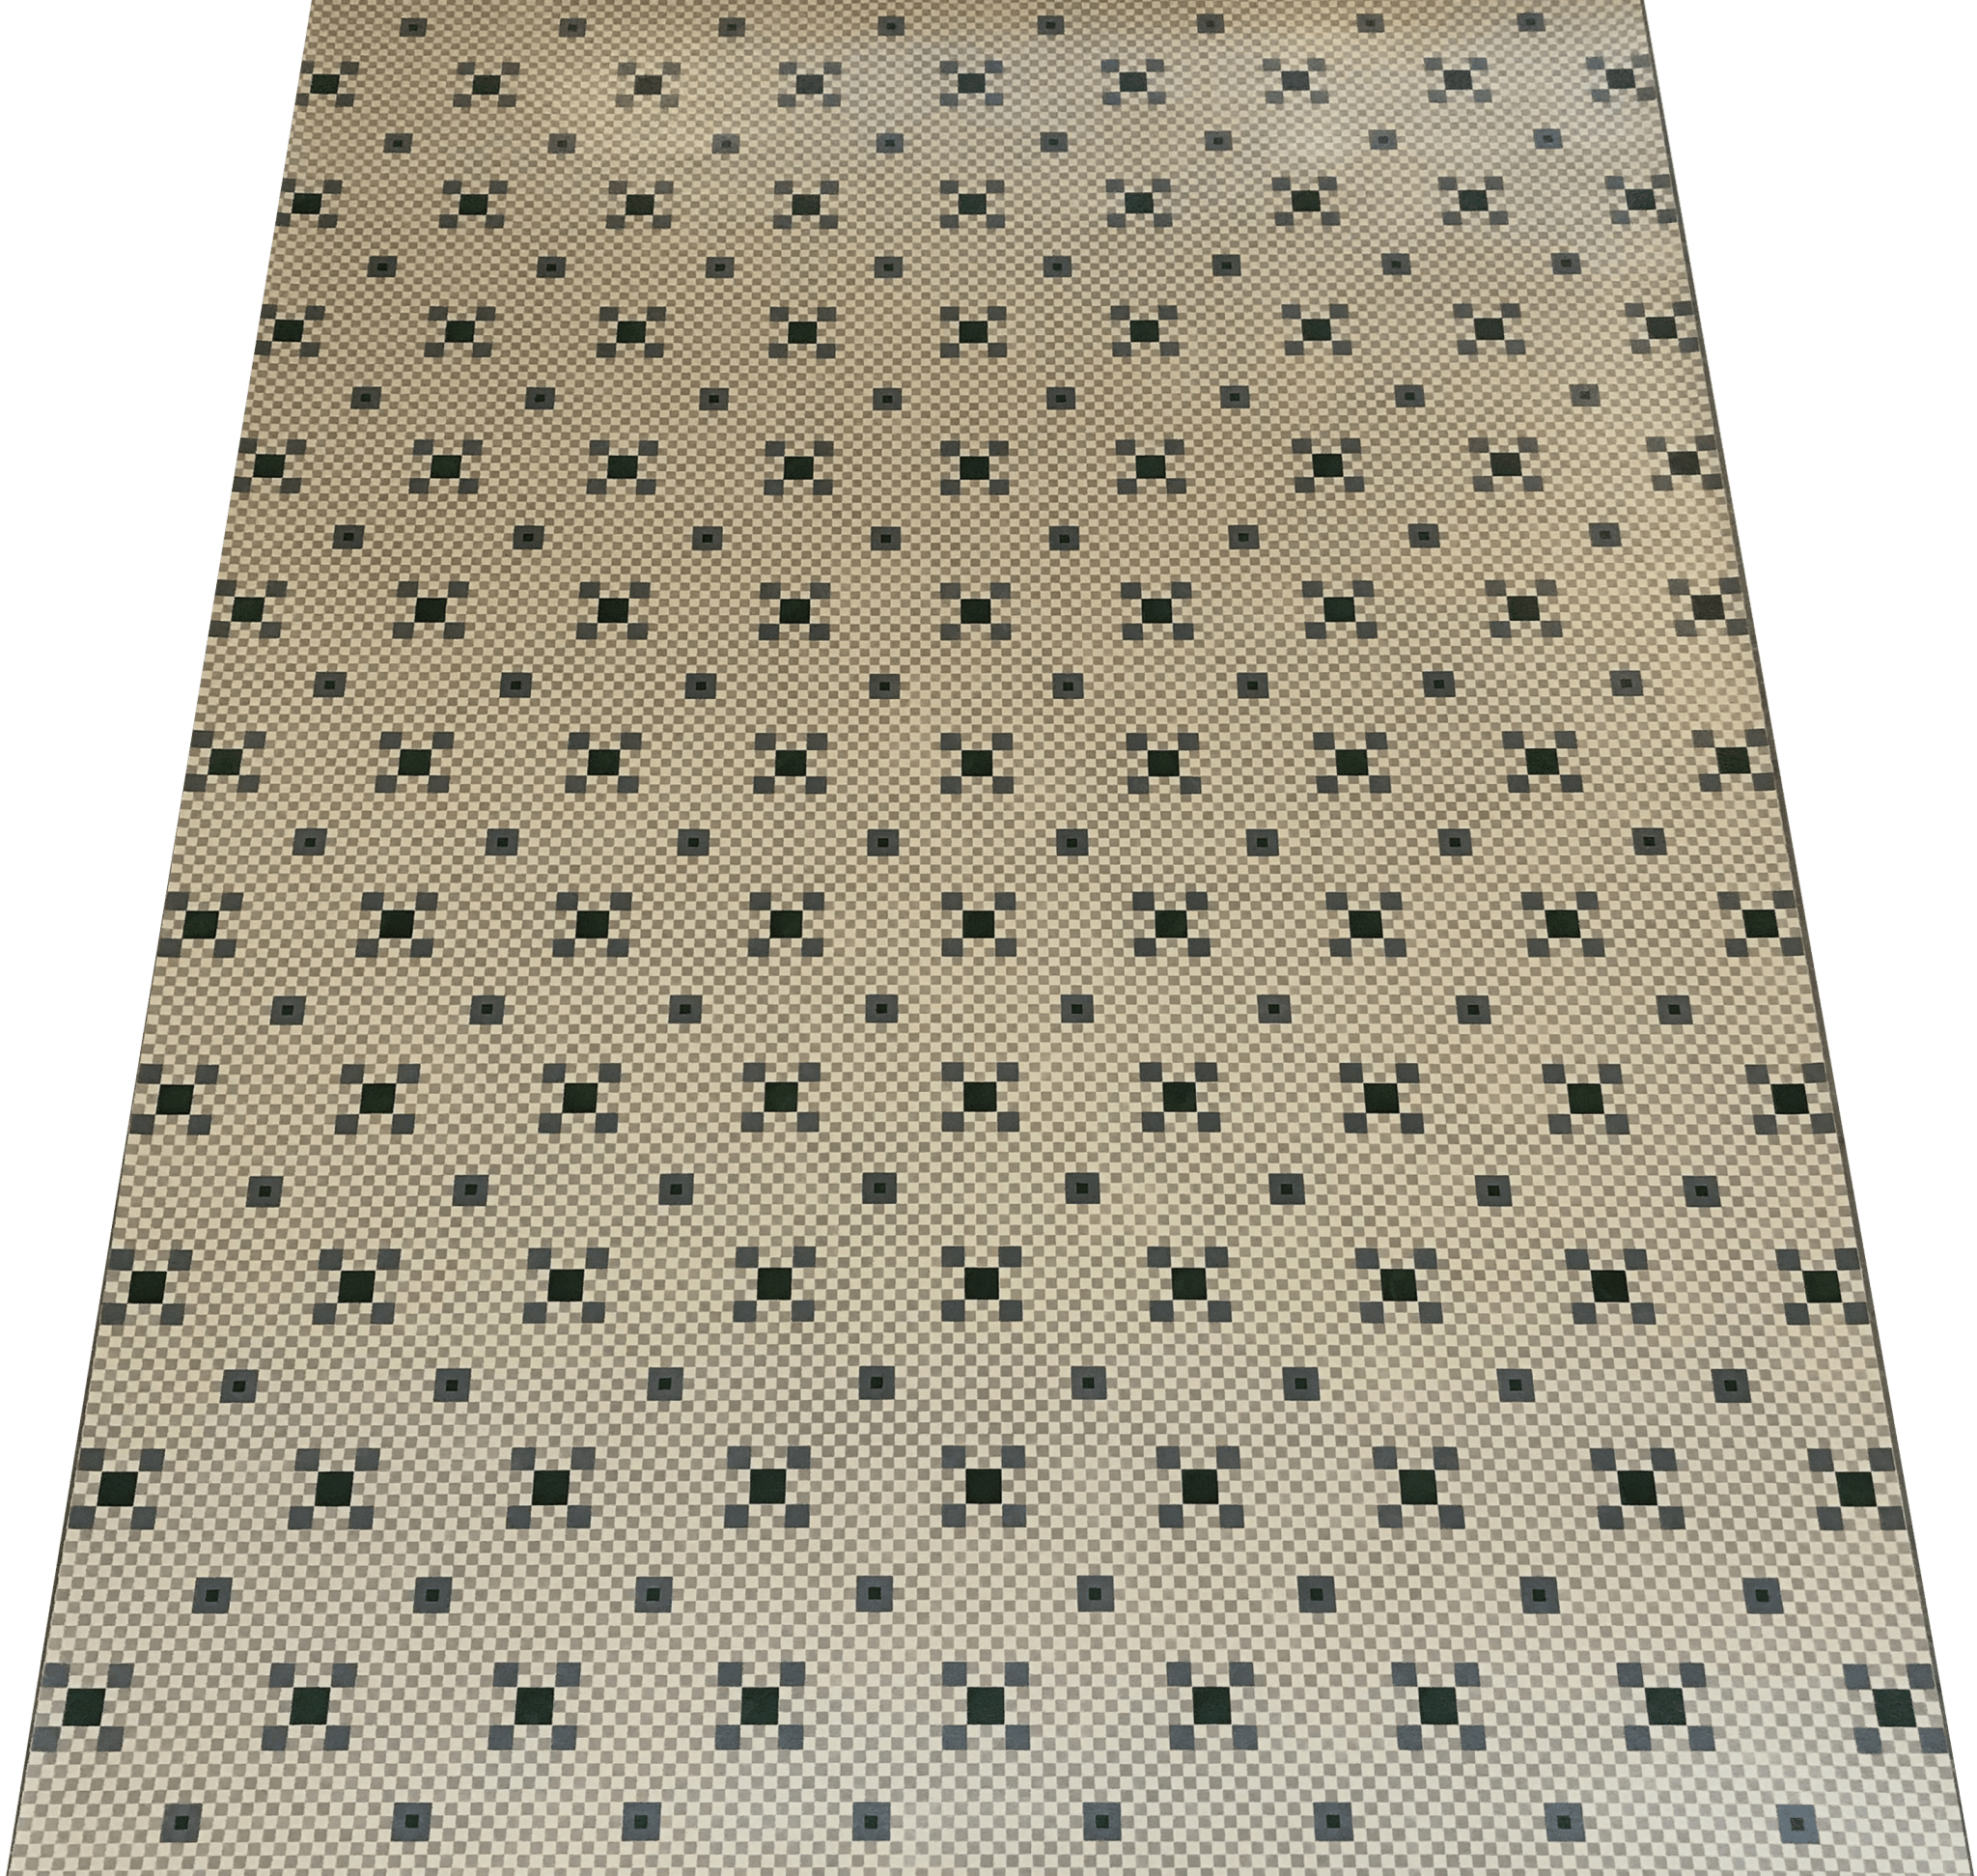 This floorcloth is based on an original linoleum pattern although the spacing between motifs is four diamonds vs. seven. 